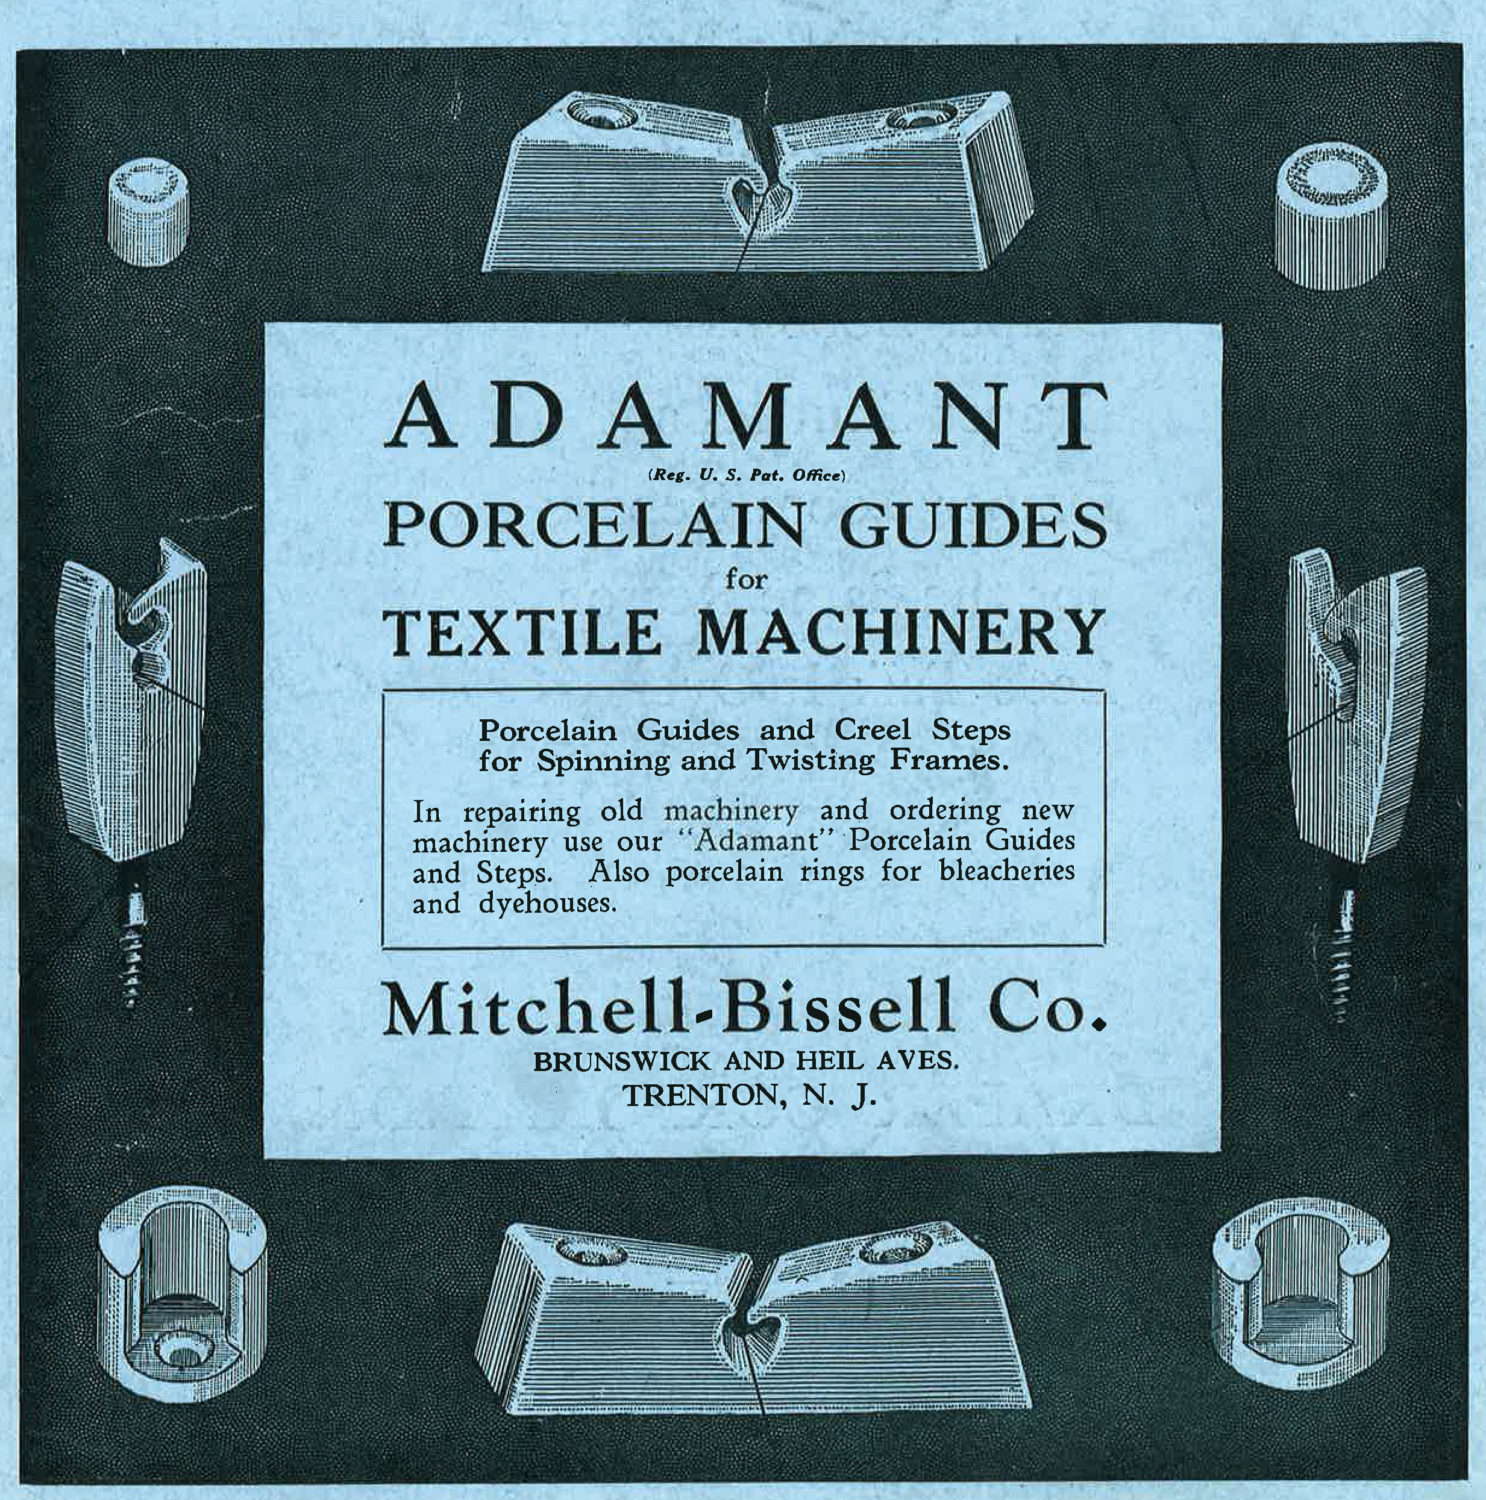 Mitchell-Bissell Company Advertisement